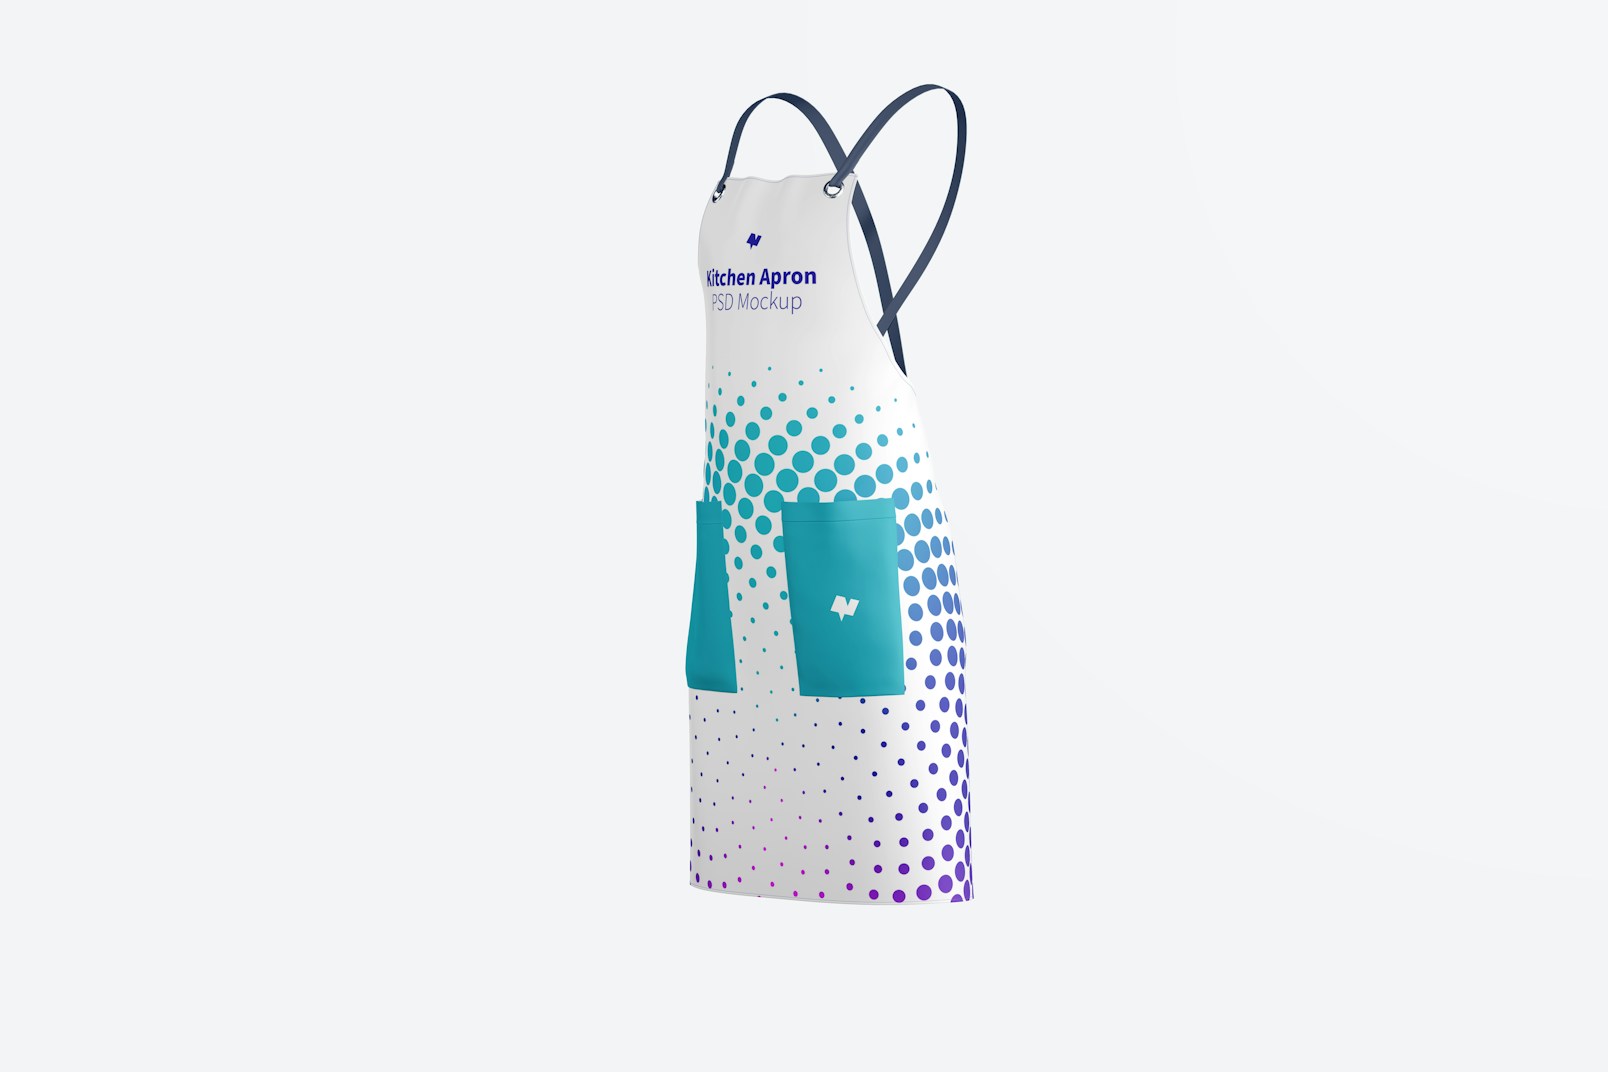 Kitchen Apron Mockup, Right Side View